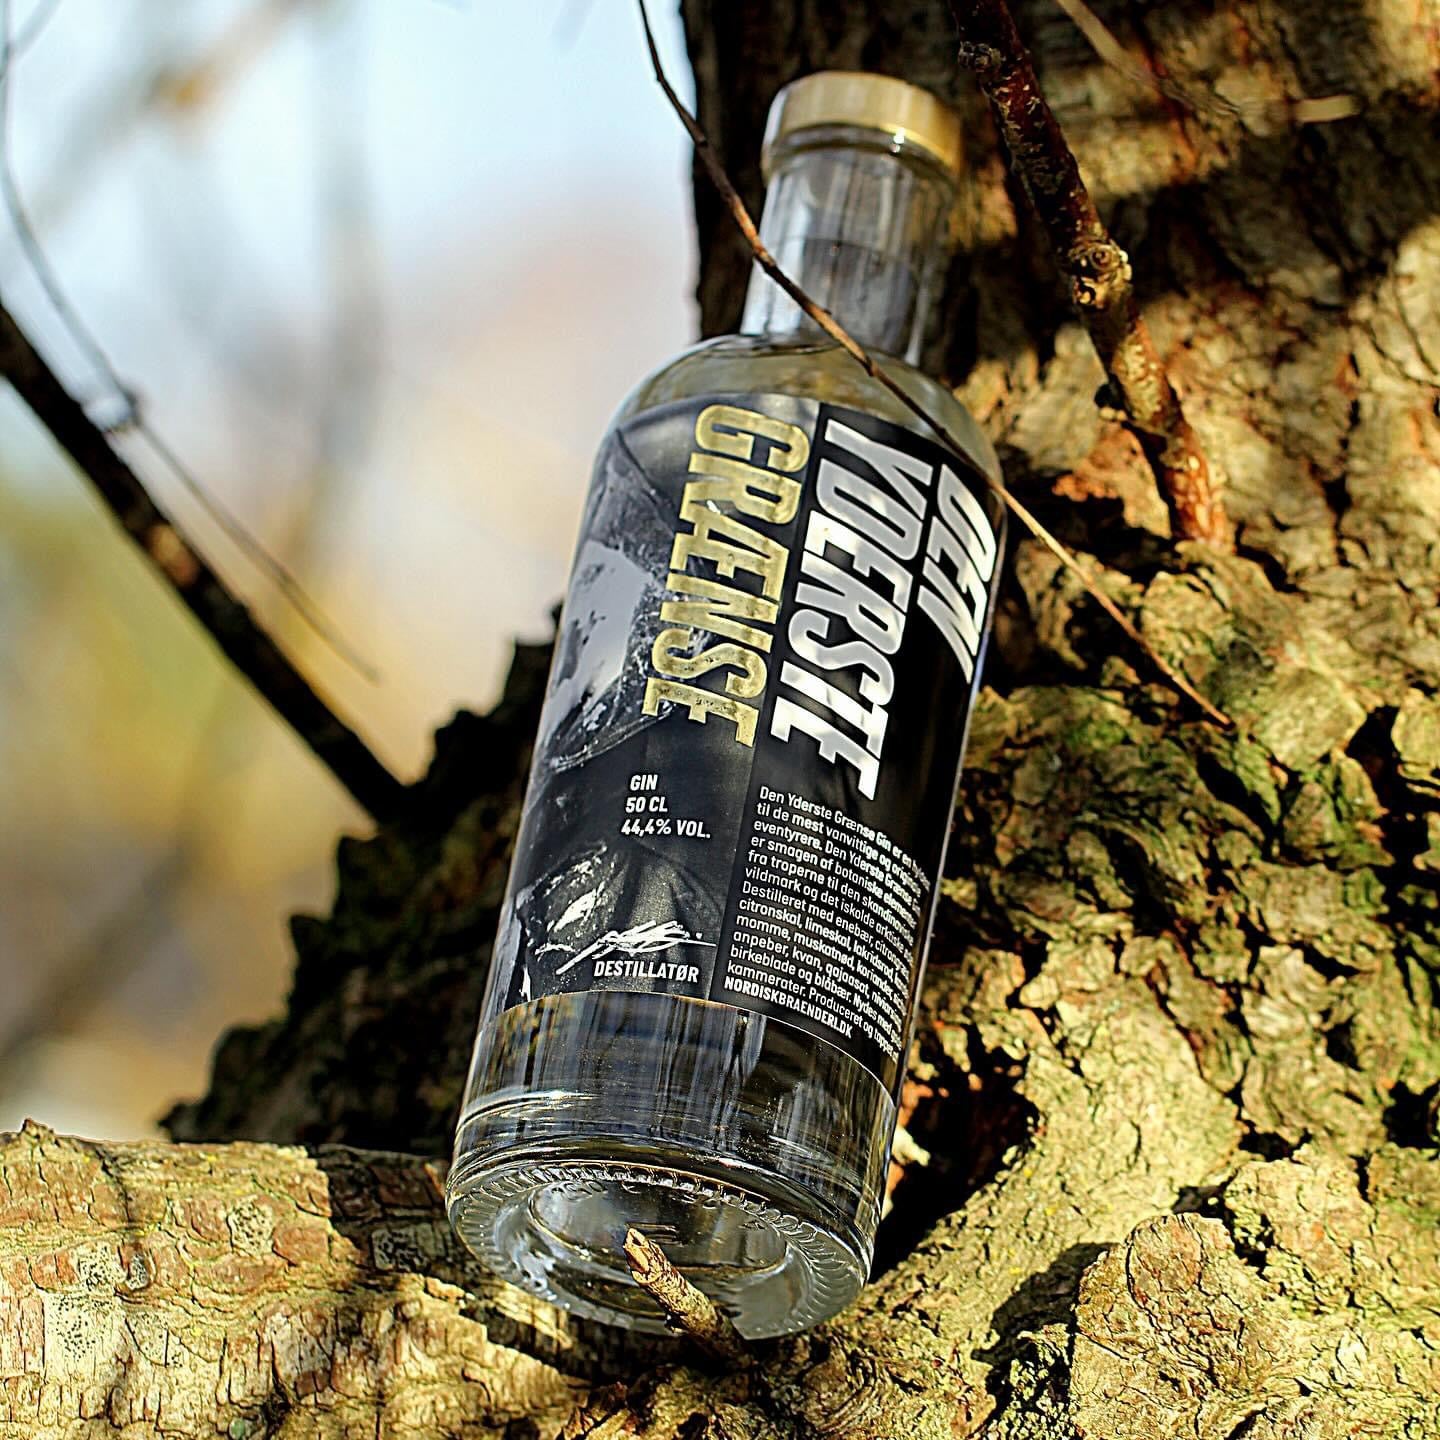 The Outer Limits Gin